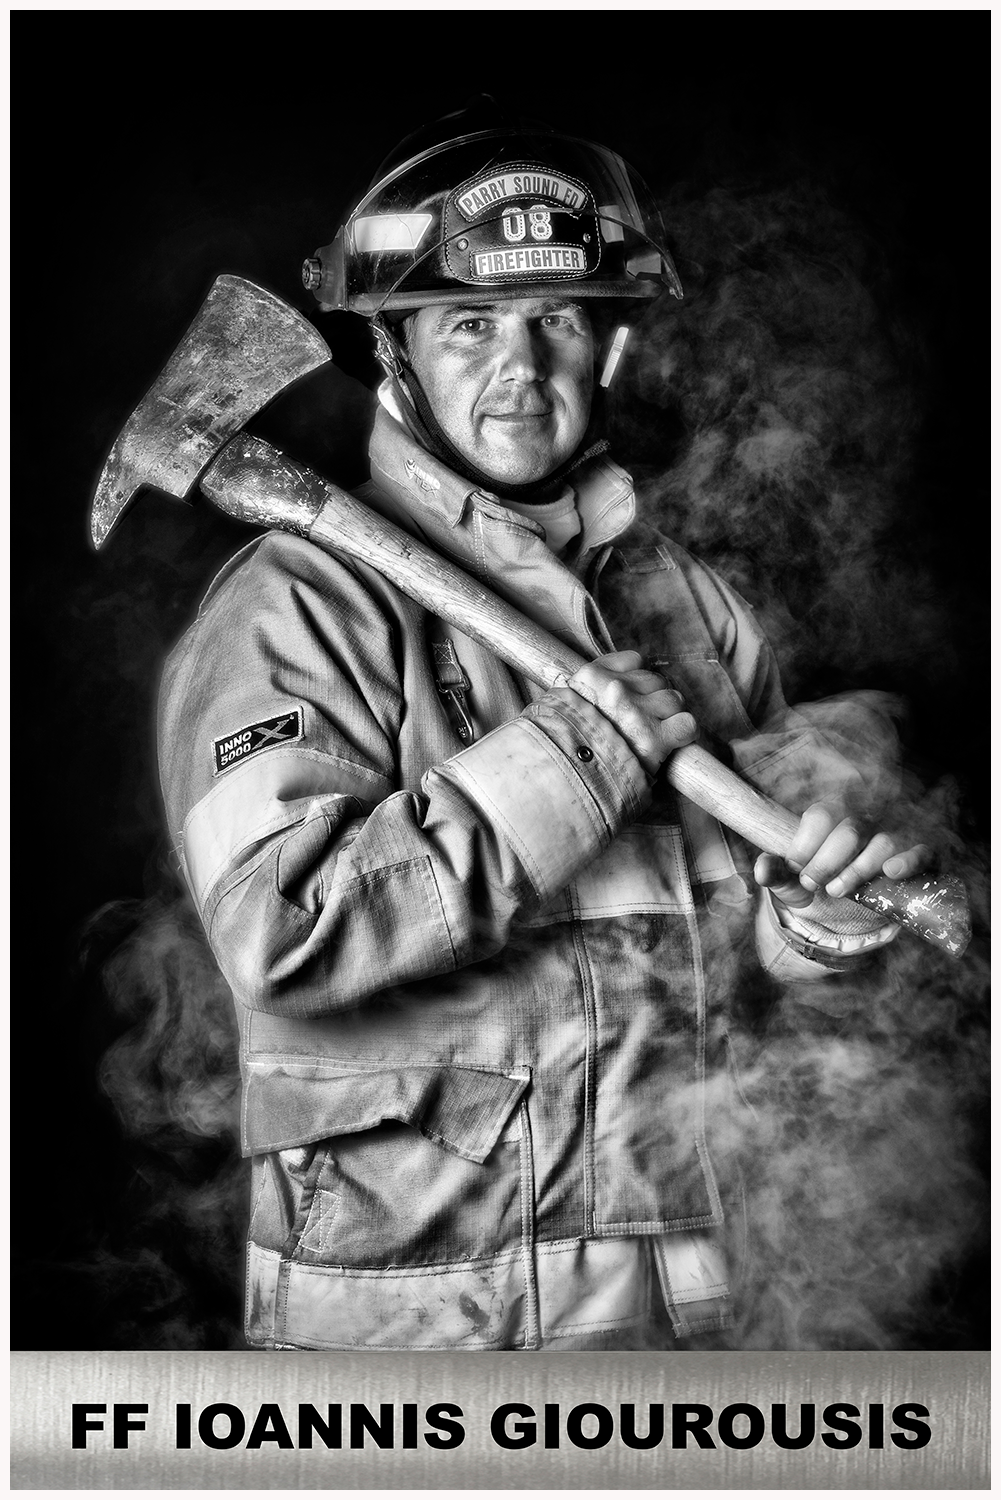 Firefighter Ioannis Giourousis